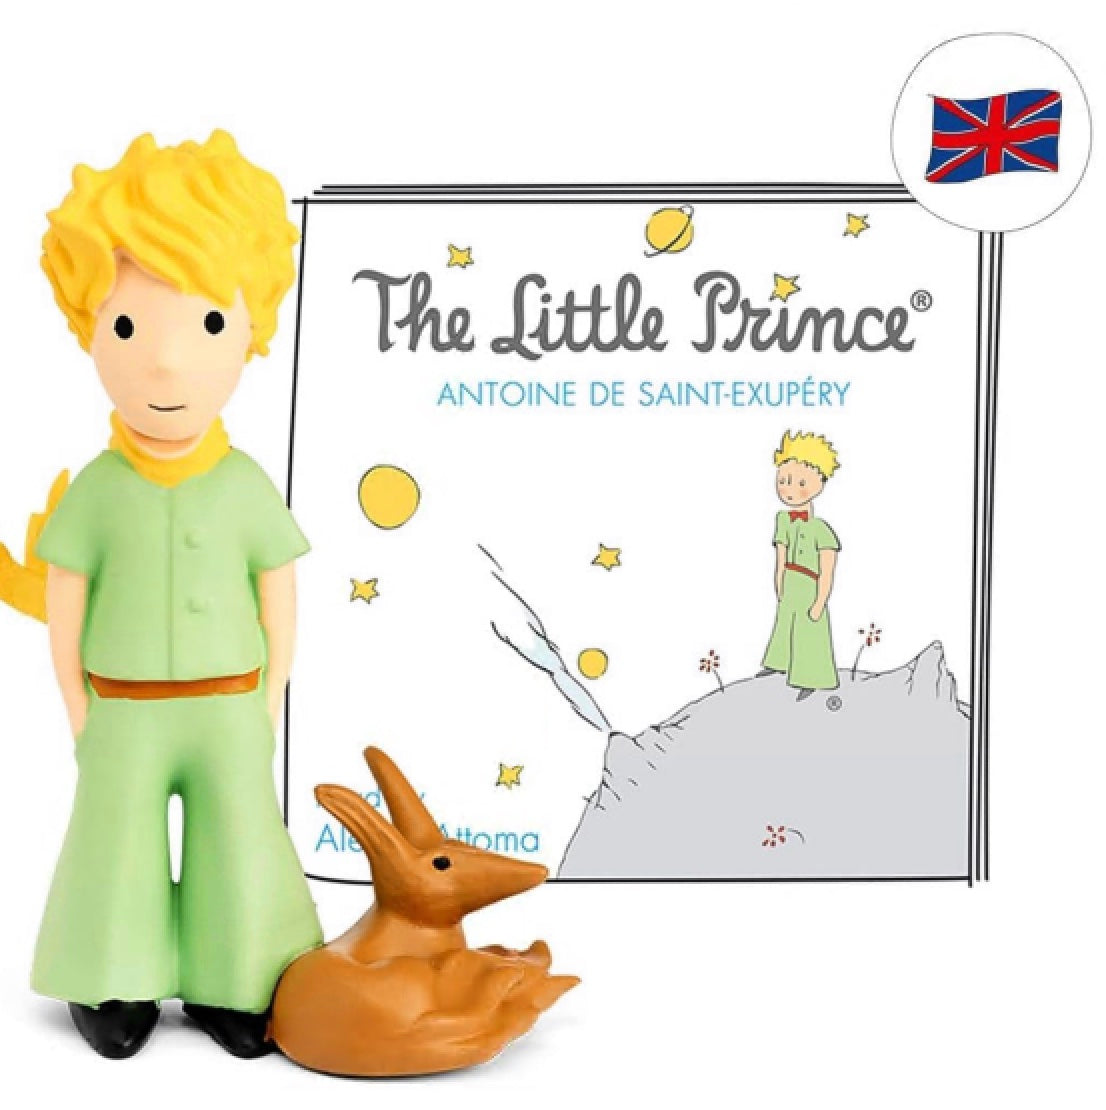 The little Prince - The Little Prince [UK]